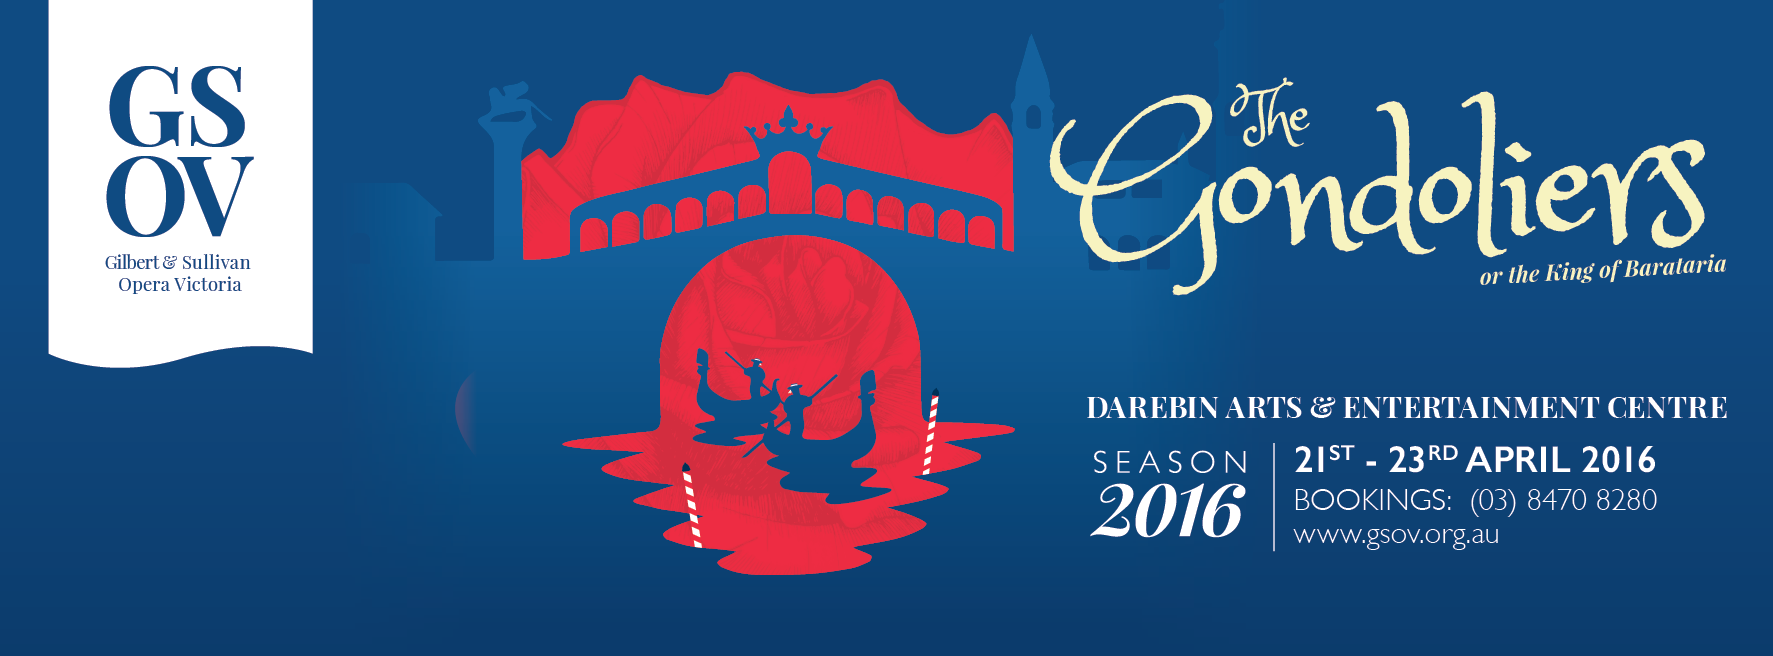 The Gondoliers 2016 - presented by GSOV